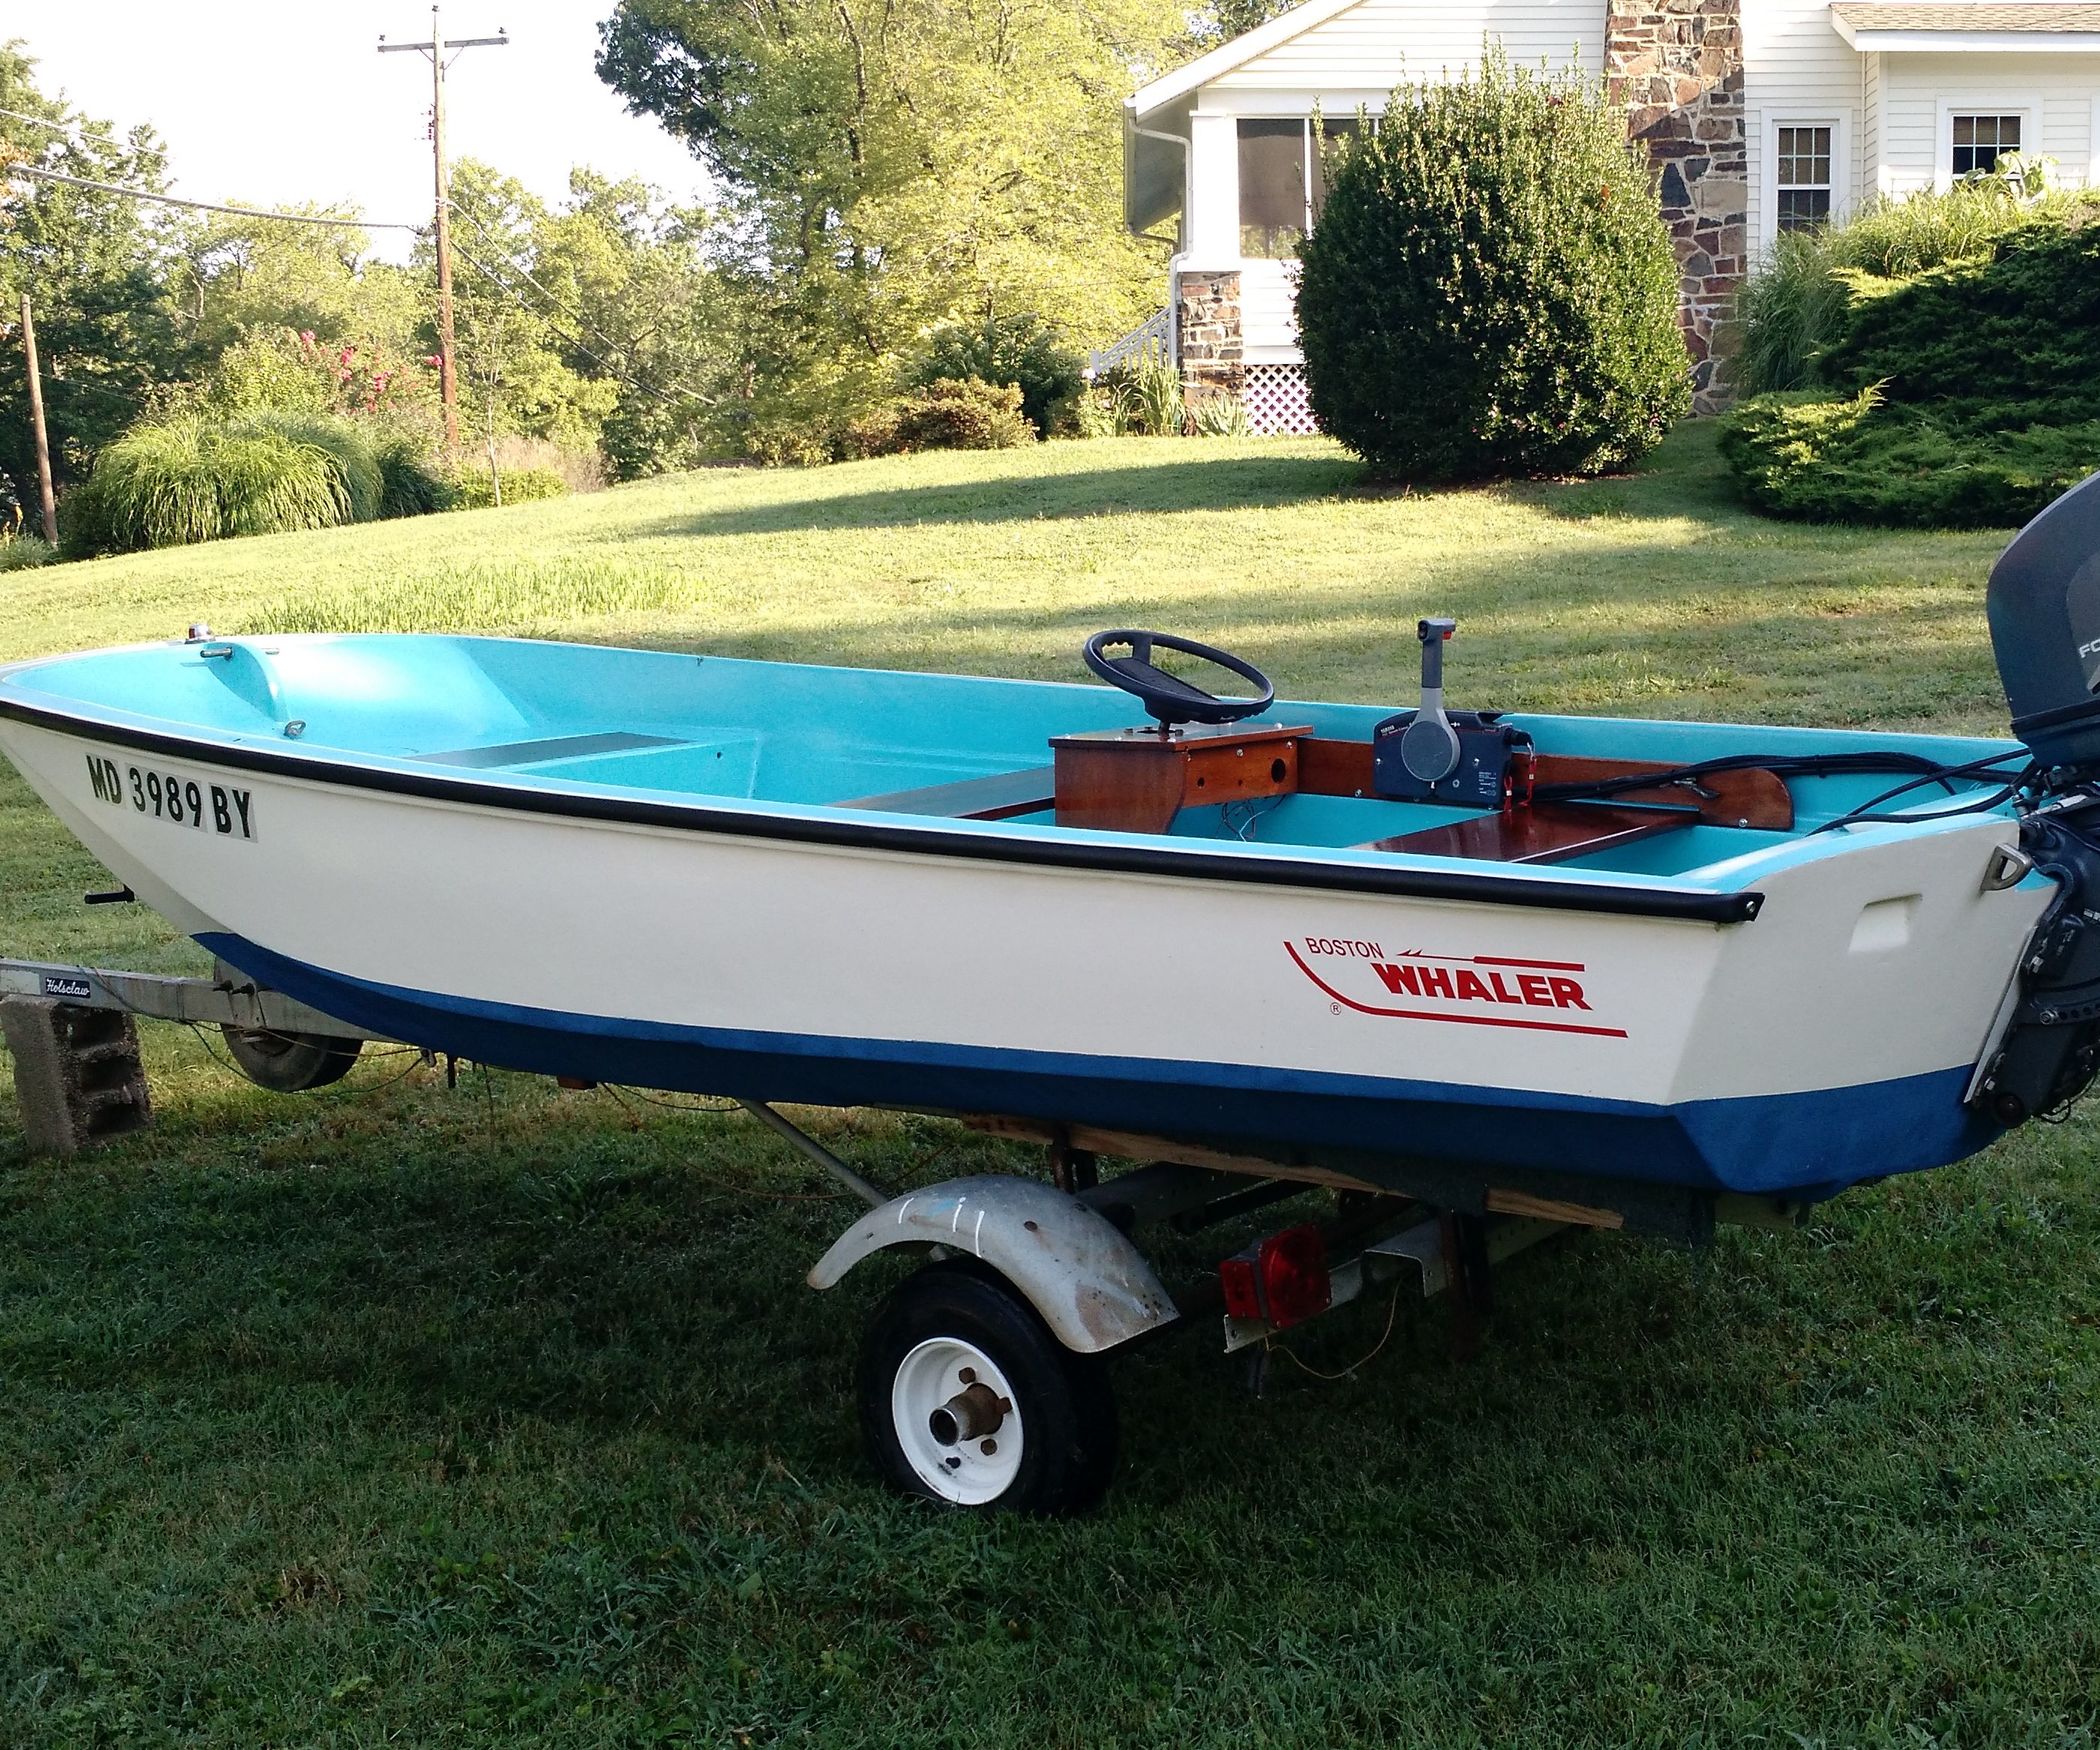 Restoring a Classic Boston Whaler/Learning Adventure